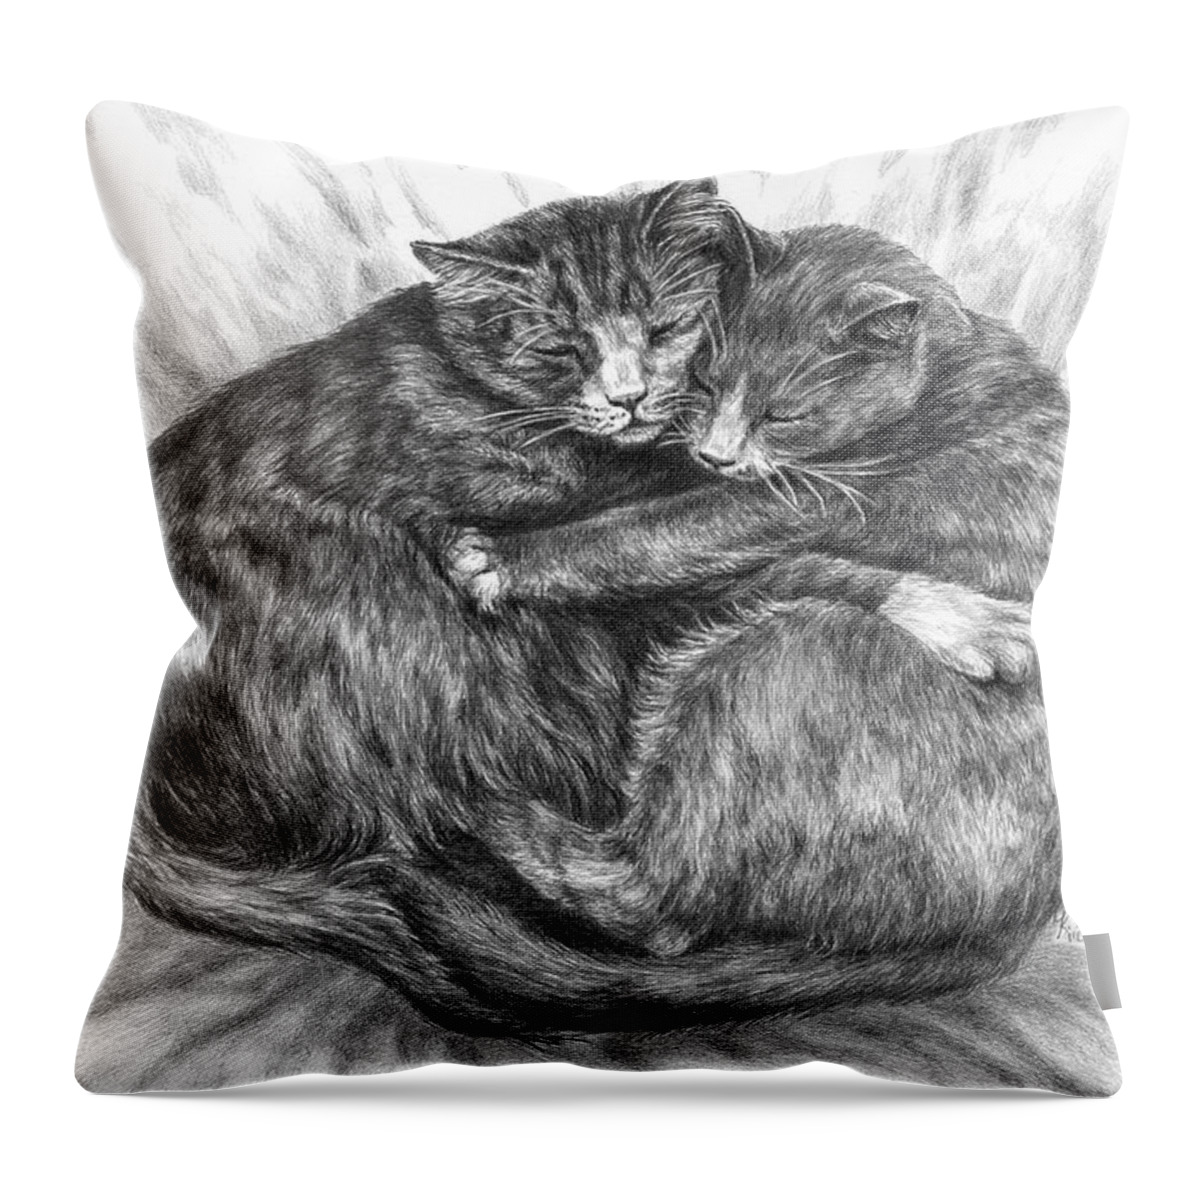 Cat Throw Pillow featuring the drawing Cuddly Cats - Black and White Art Print by Kelli Swan